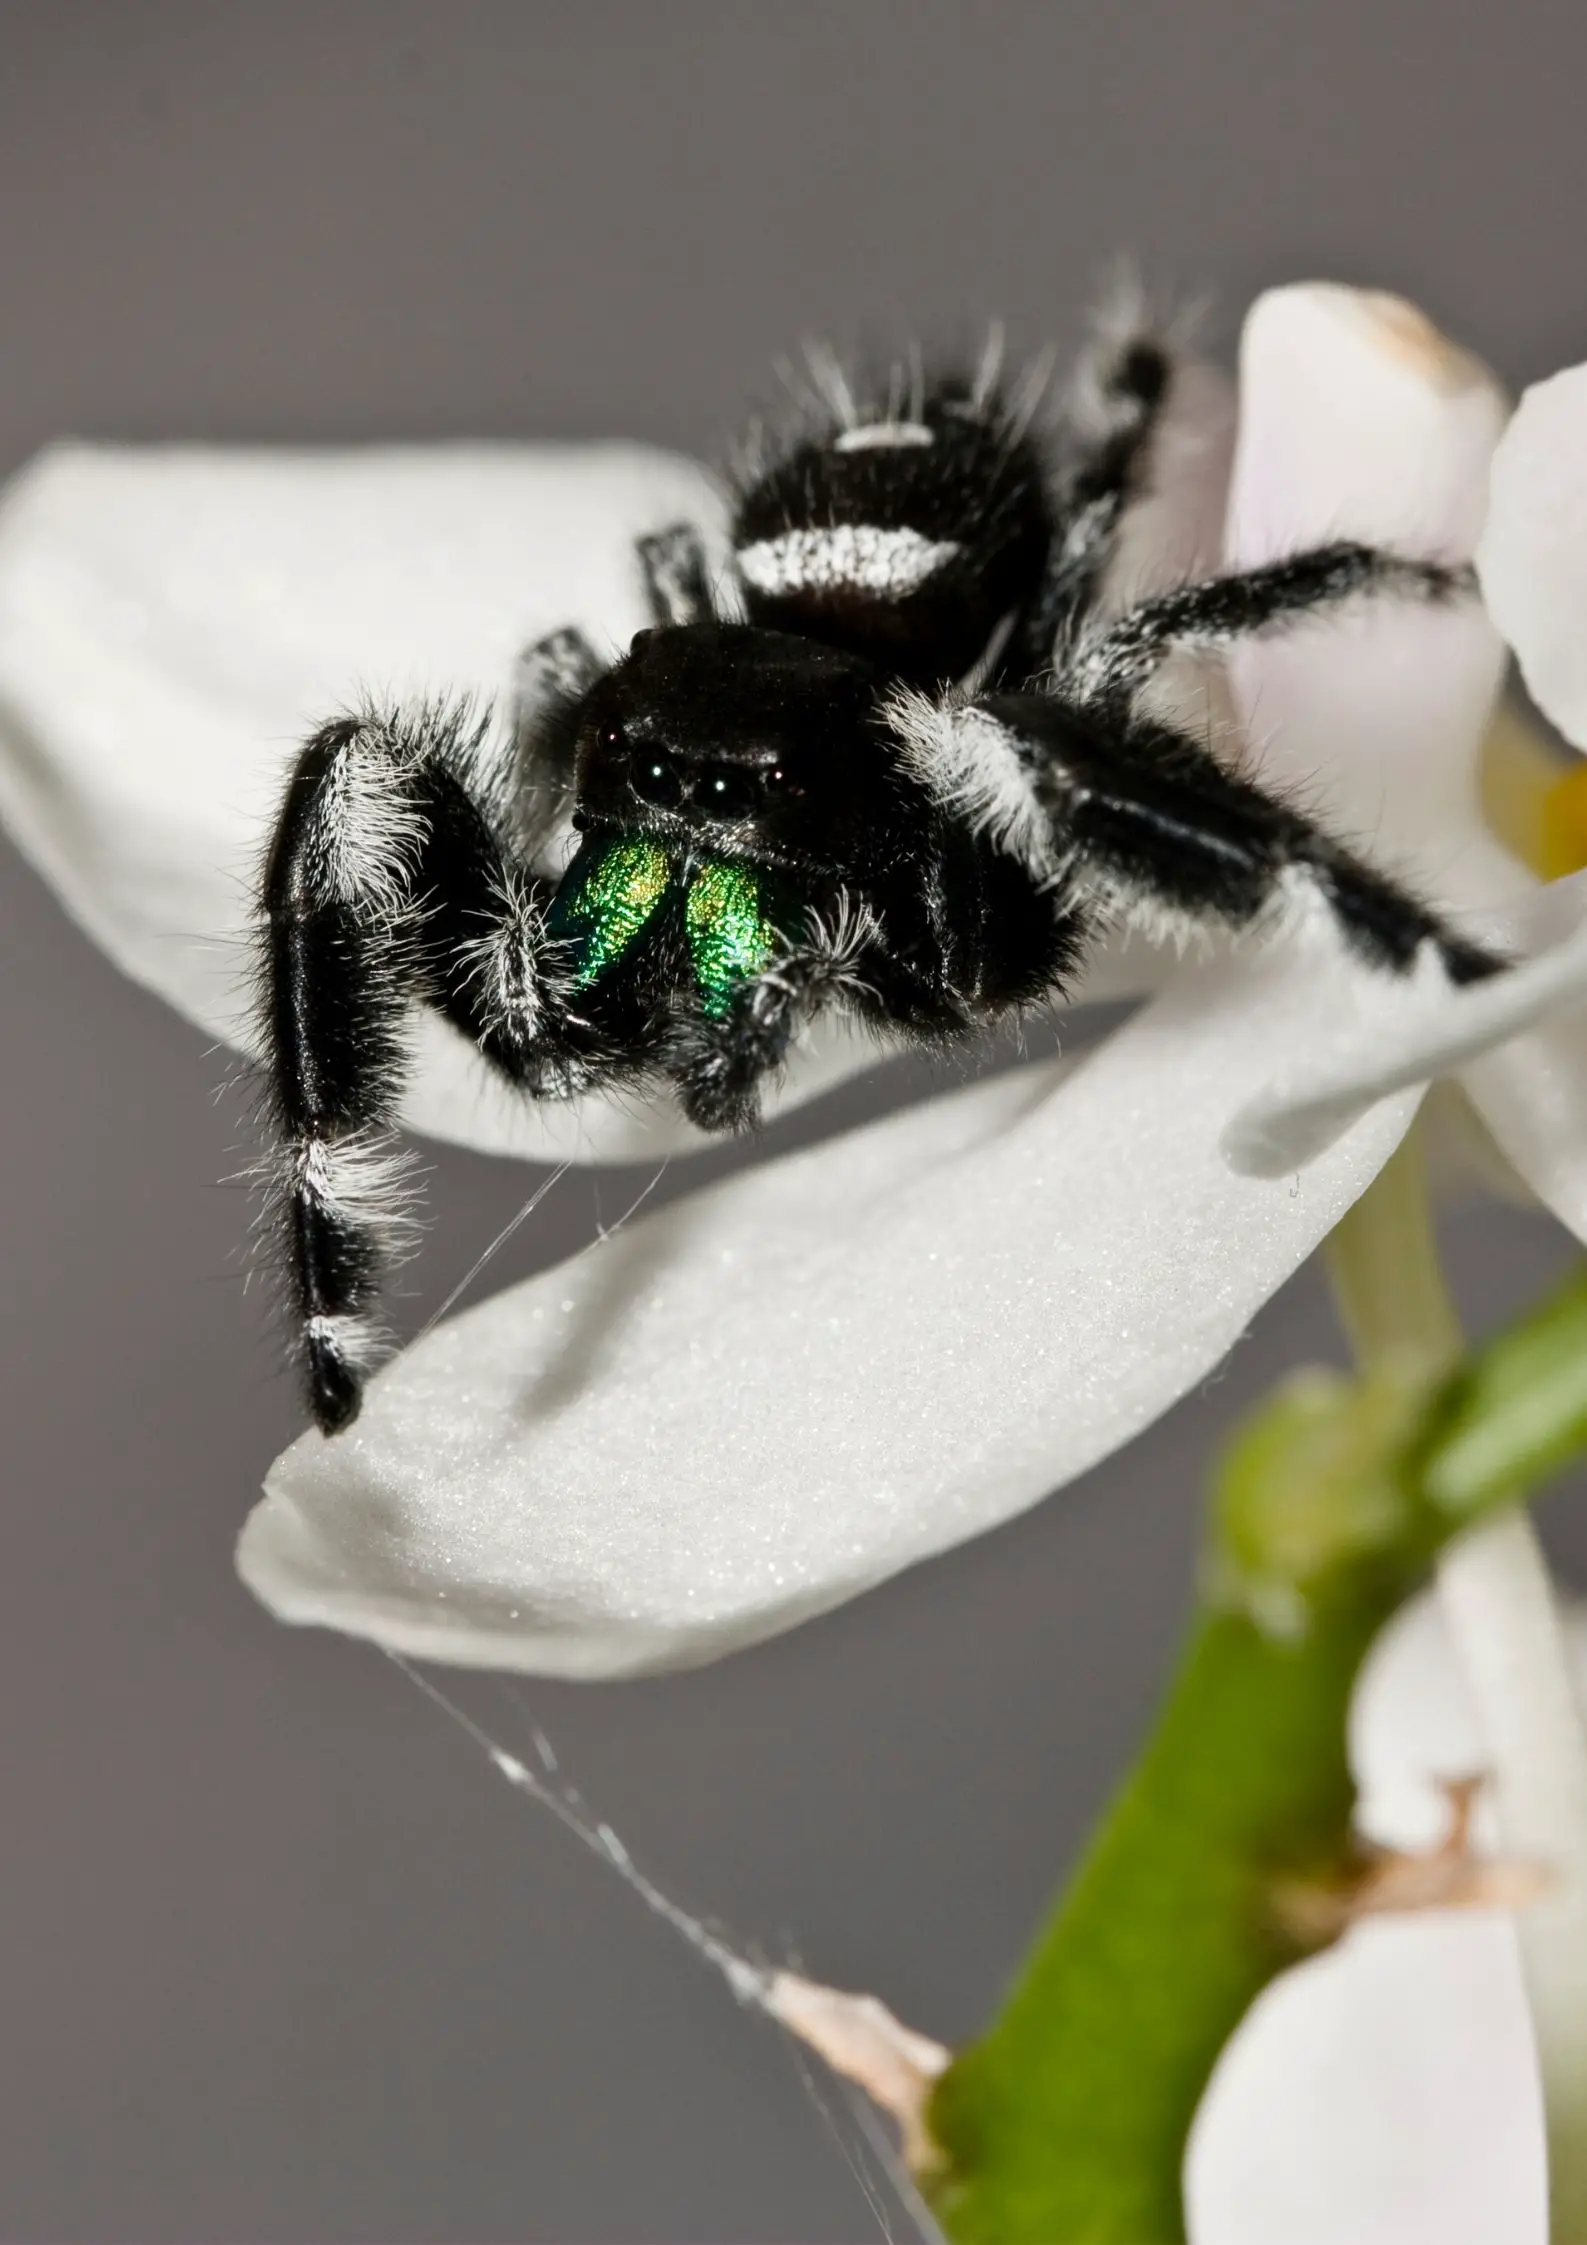 Regal Jumping Spider care